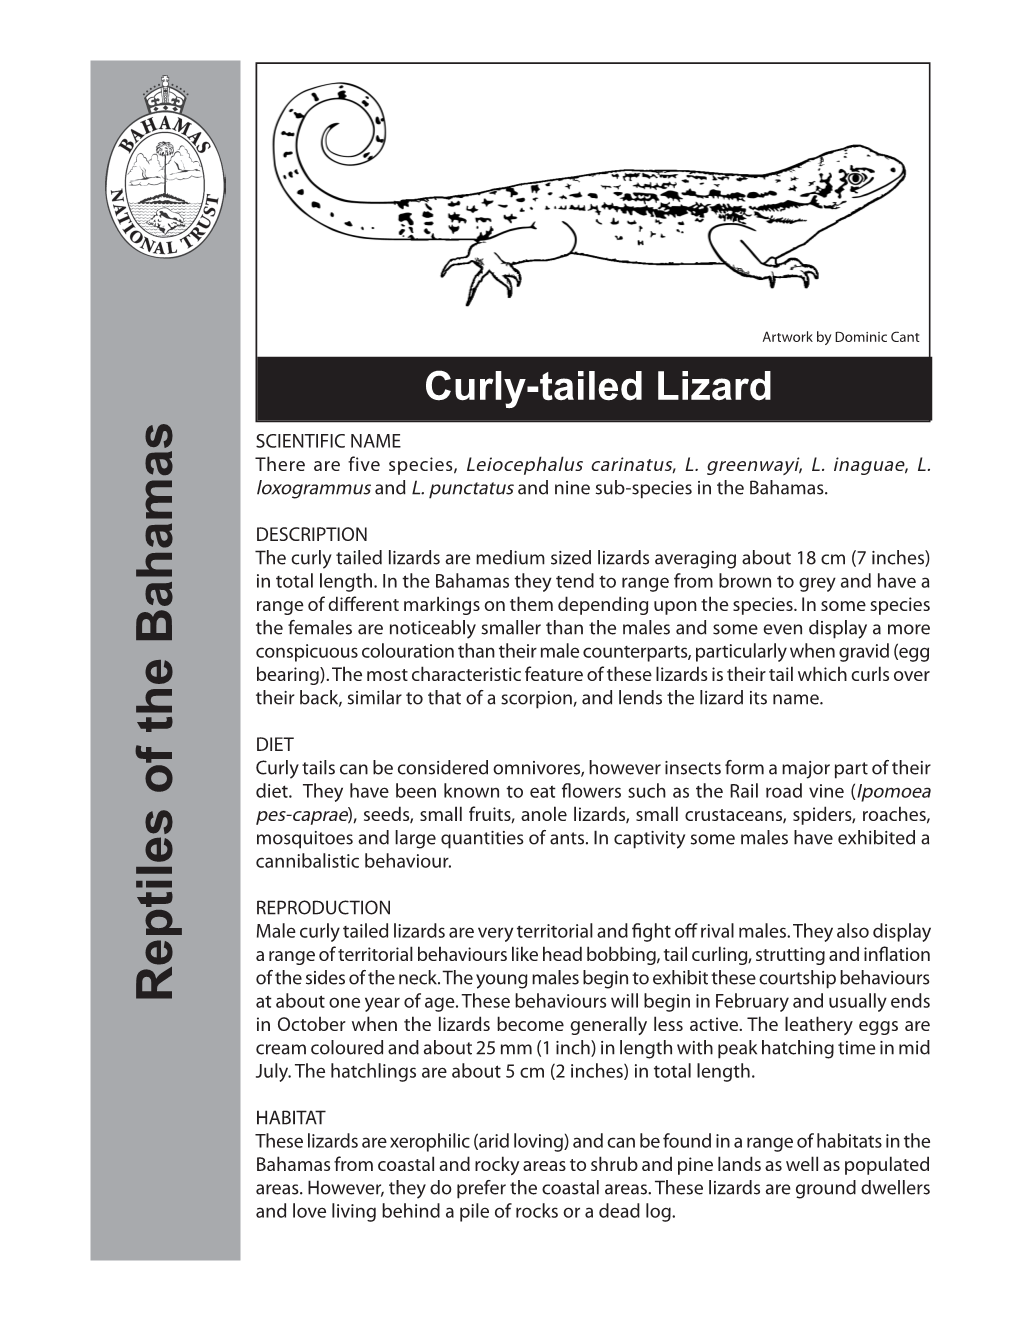 Curly-Tailed Lizard SCIENTIFIC NAME There Are Five Species, Leiocephalus Carinatus, L